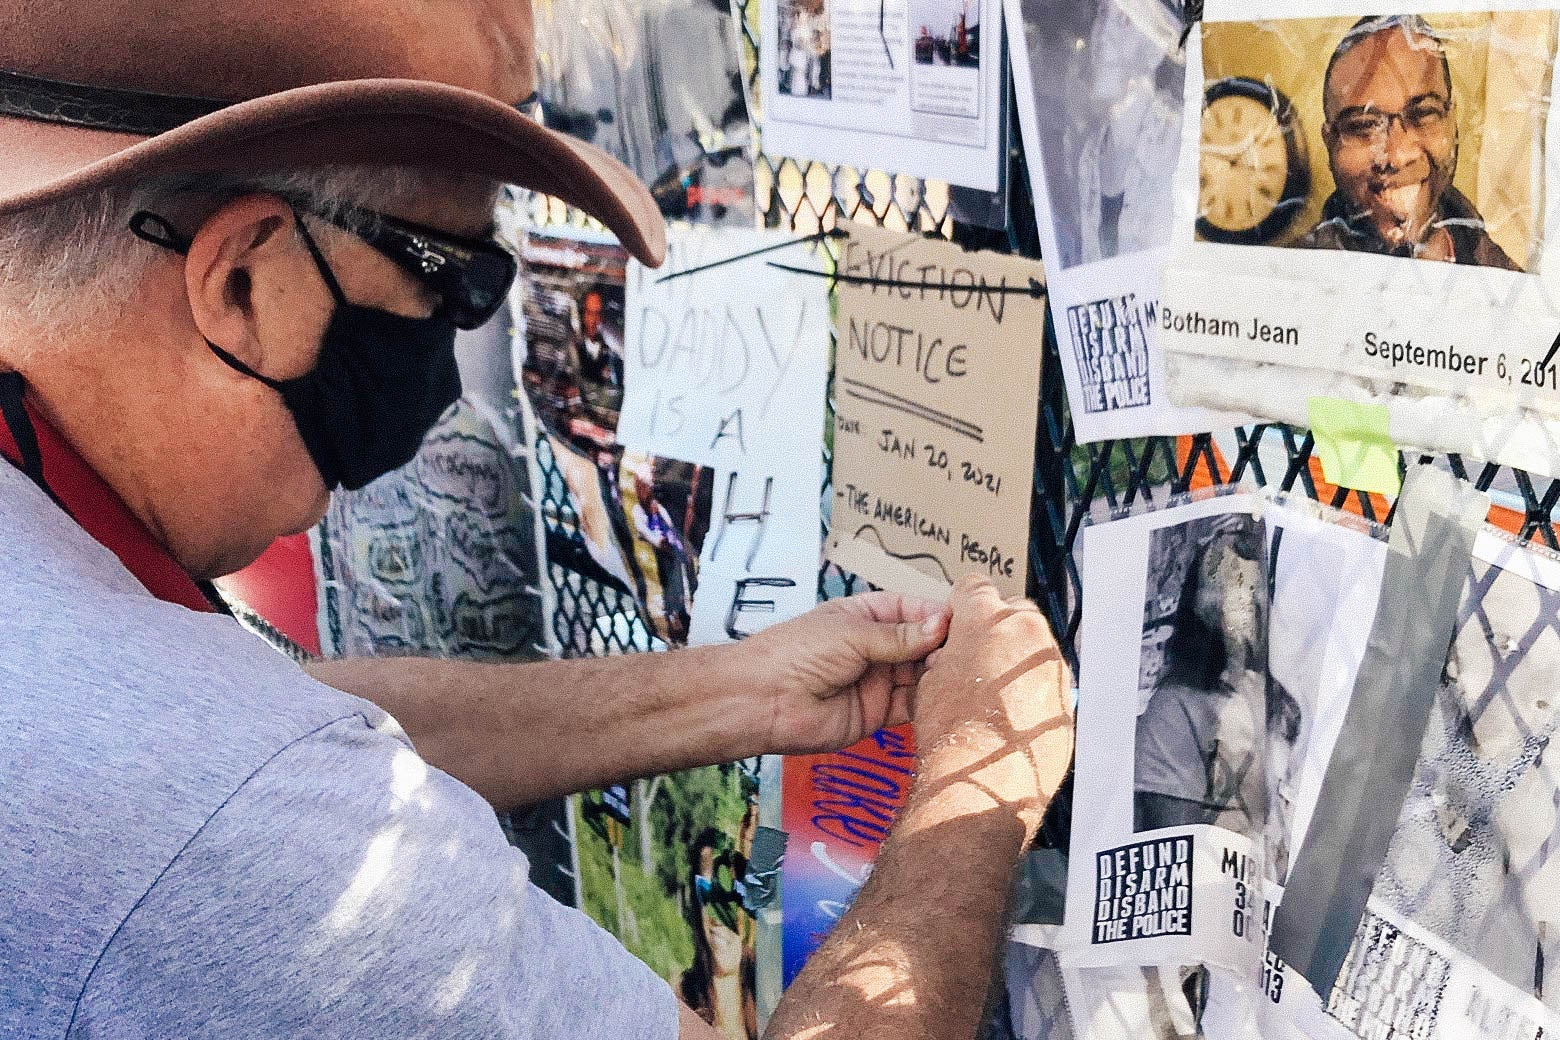 A man posts a sign that says "EVICTION NOTICE" on a fence covered in fliers and photographs.